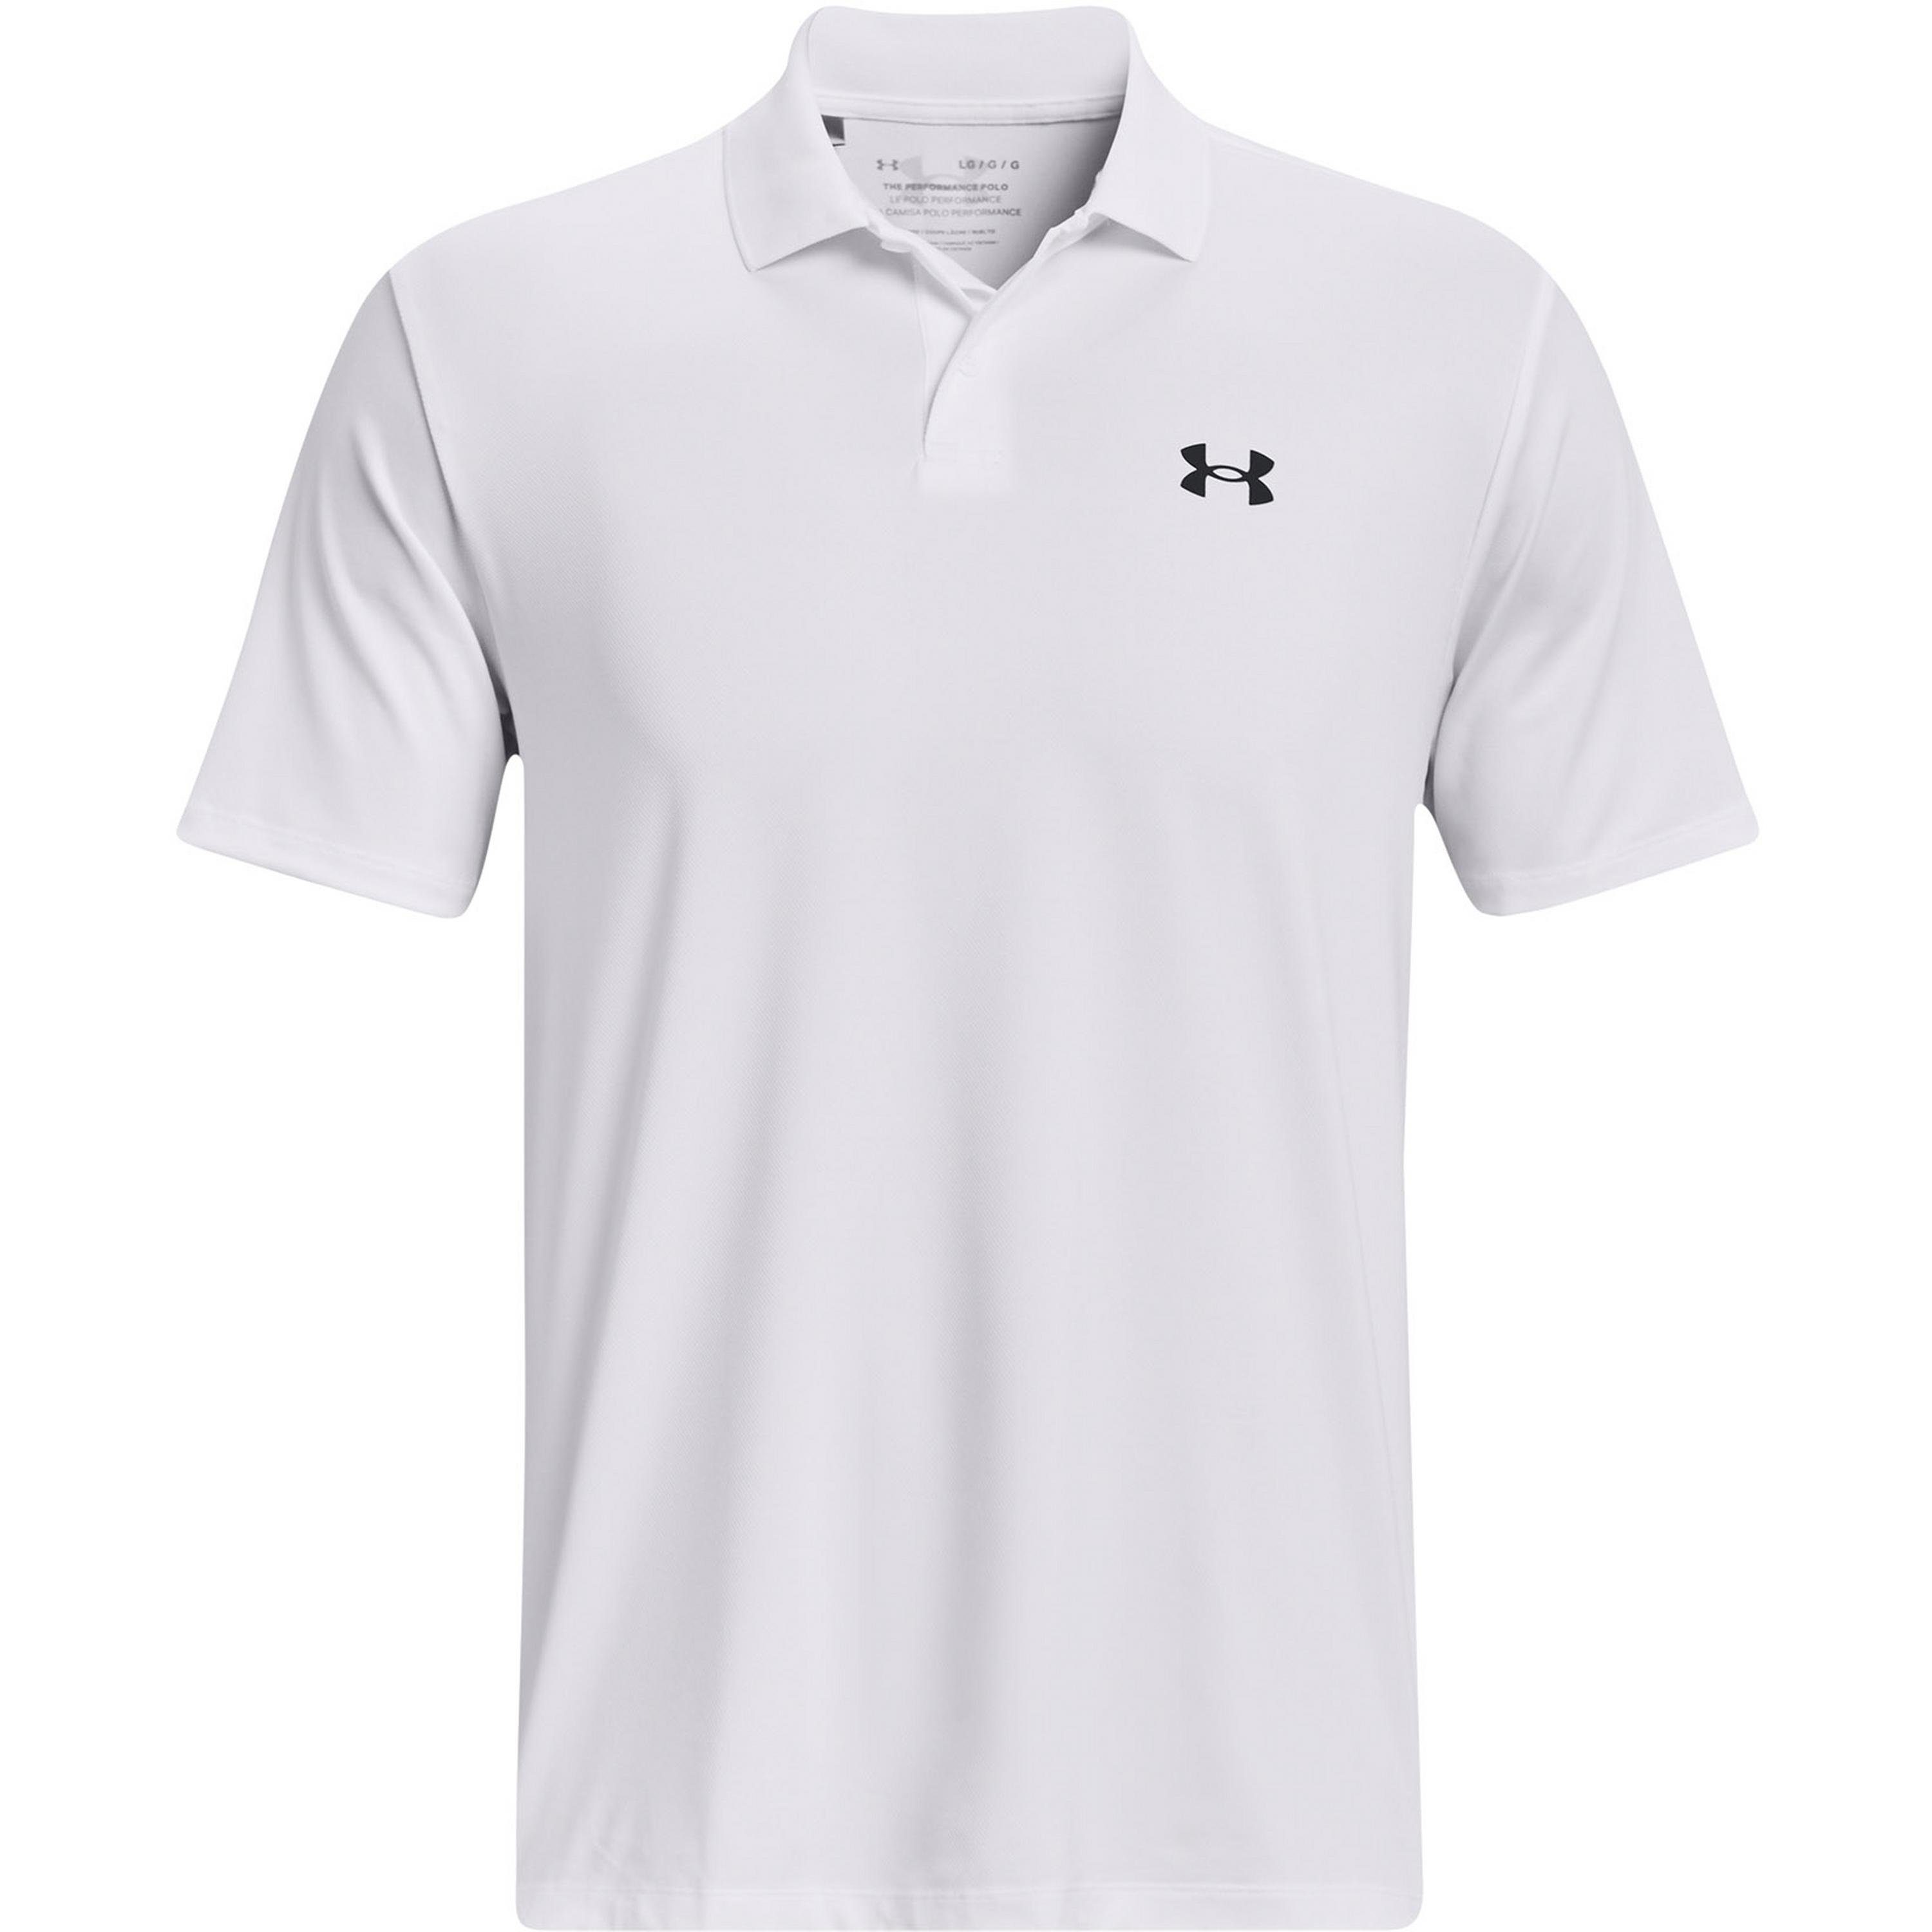 Under Armour® Poloshirt Performance 3.0 white-pitch gray